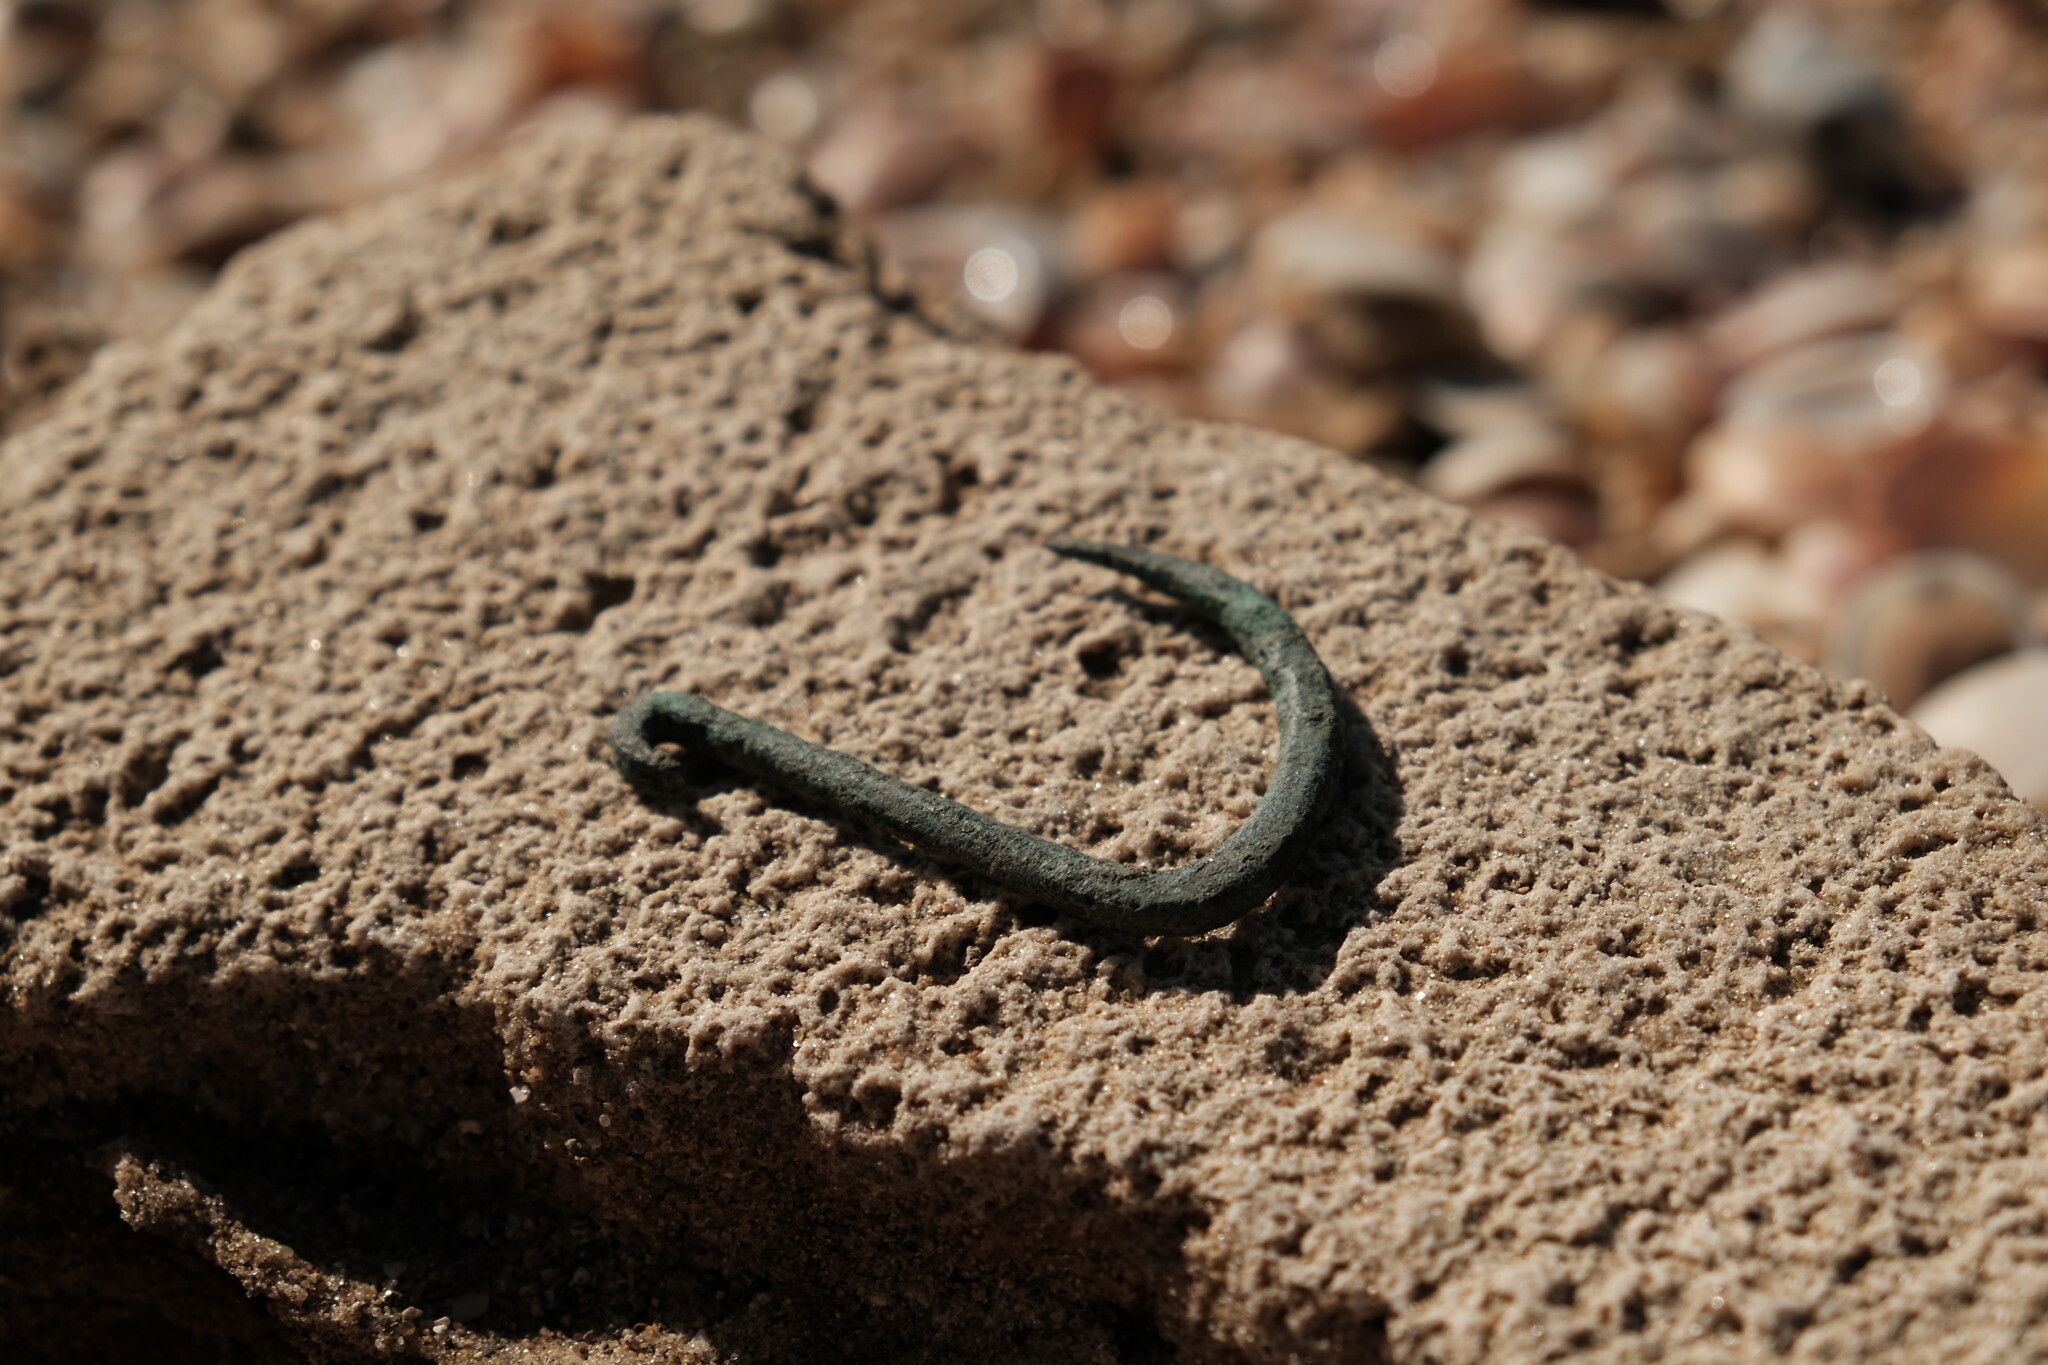 Ancient jaws: 6,000-year-old copper fishhook, oldest in region